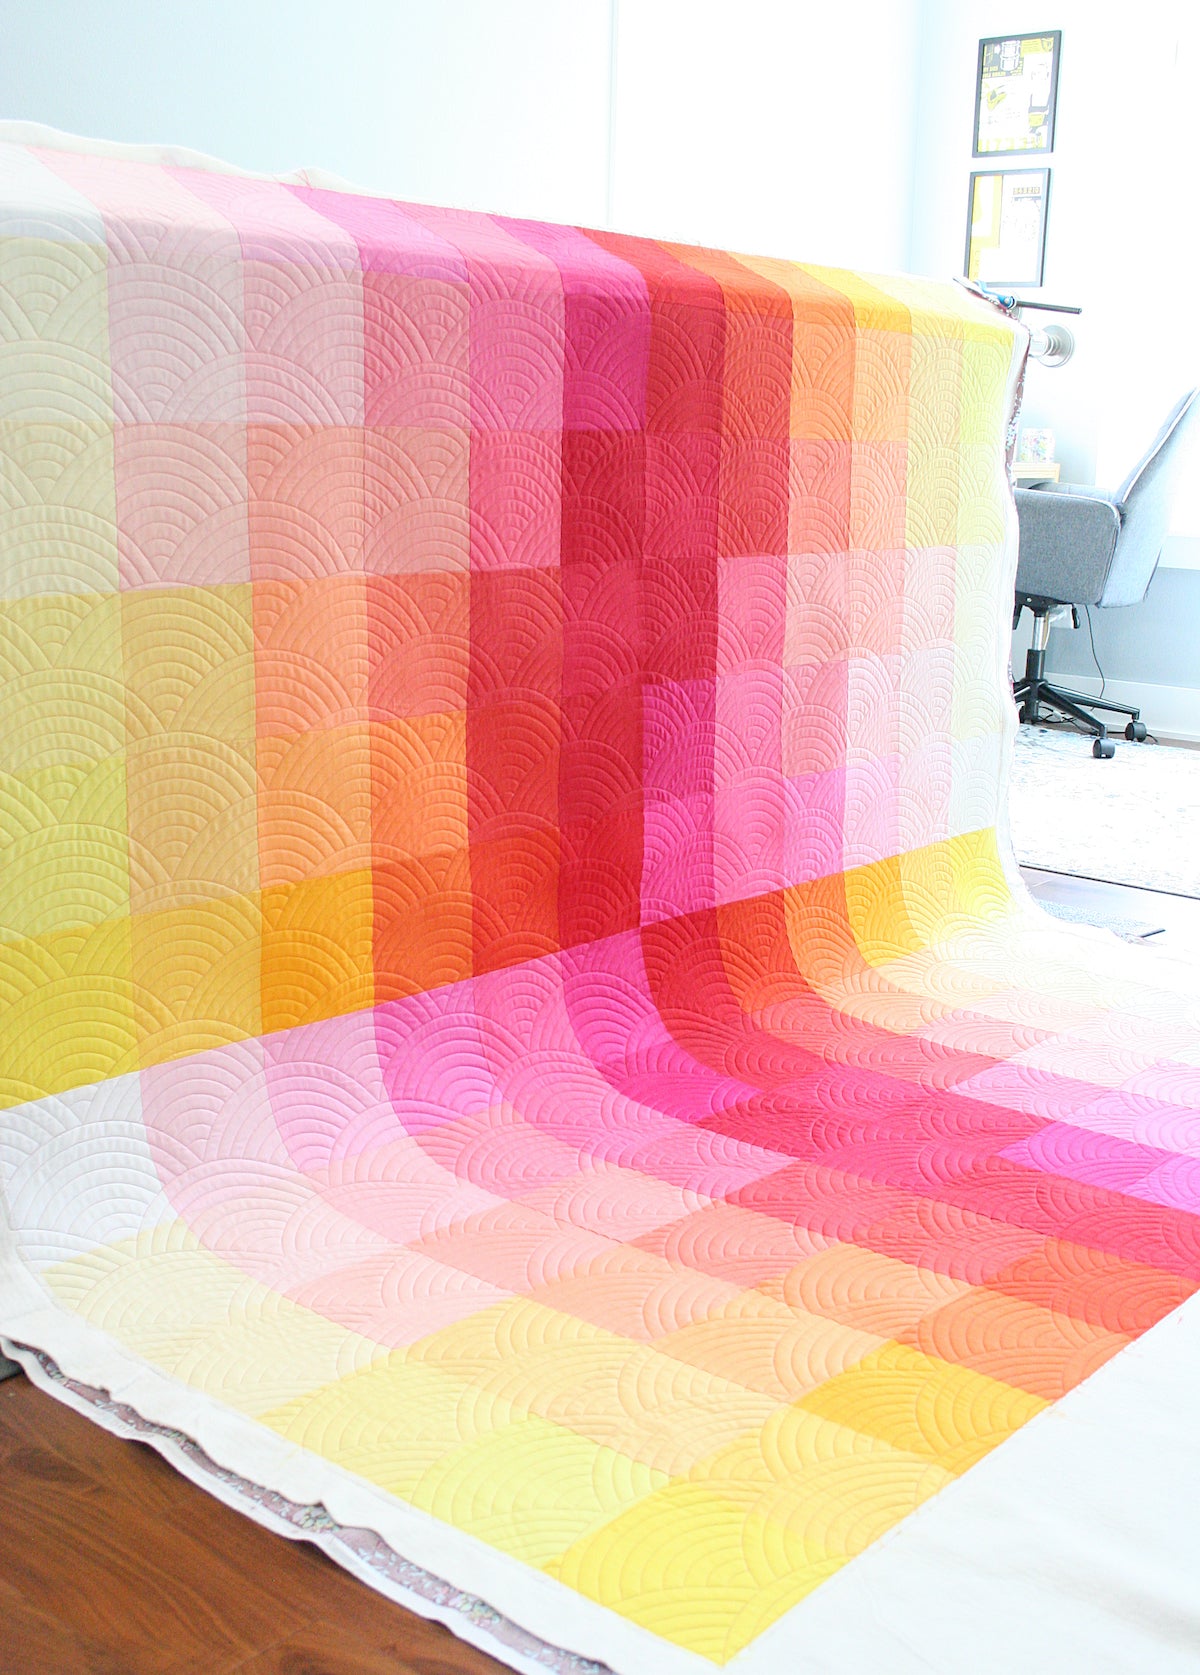 Gradient Grid Quilt: YRM - Sewfinity